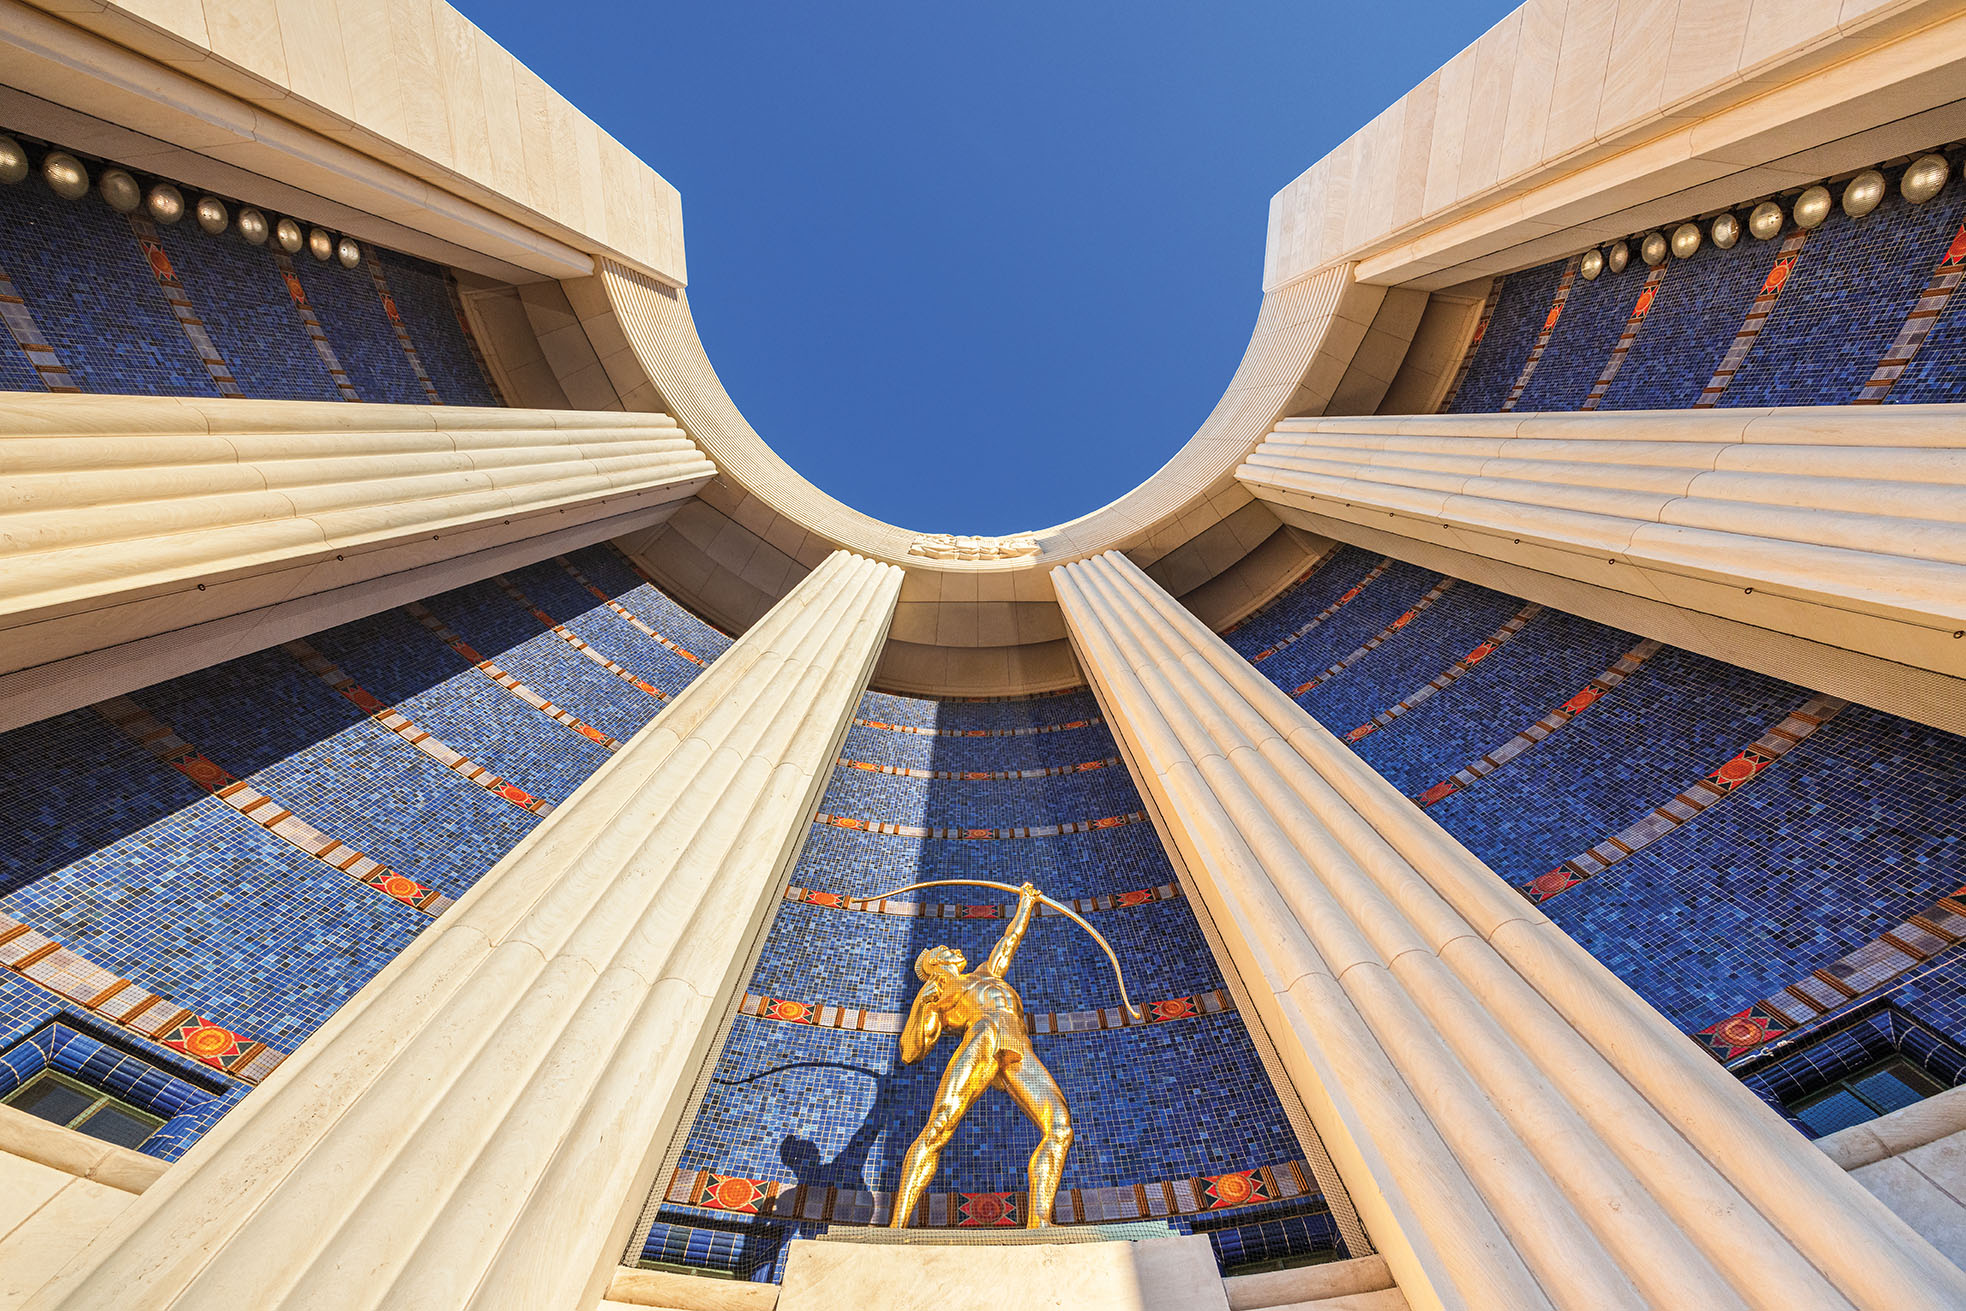 View looking upward at Allie Victoria Tennant's "Tejas Warrior" statue and the curved exedra (semicircular architectural recess) at the front entrance of the Hall of State building at Fair Park in Dallas.